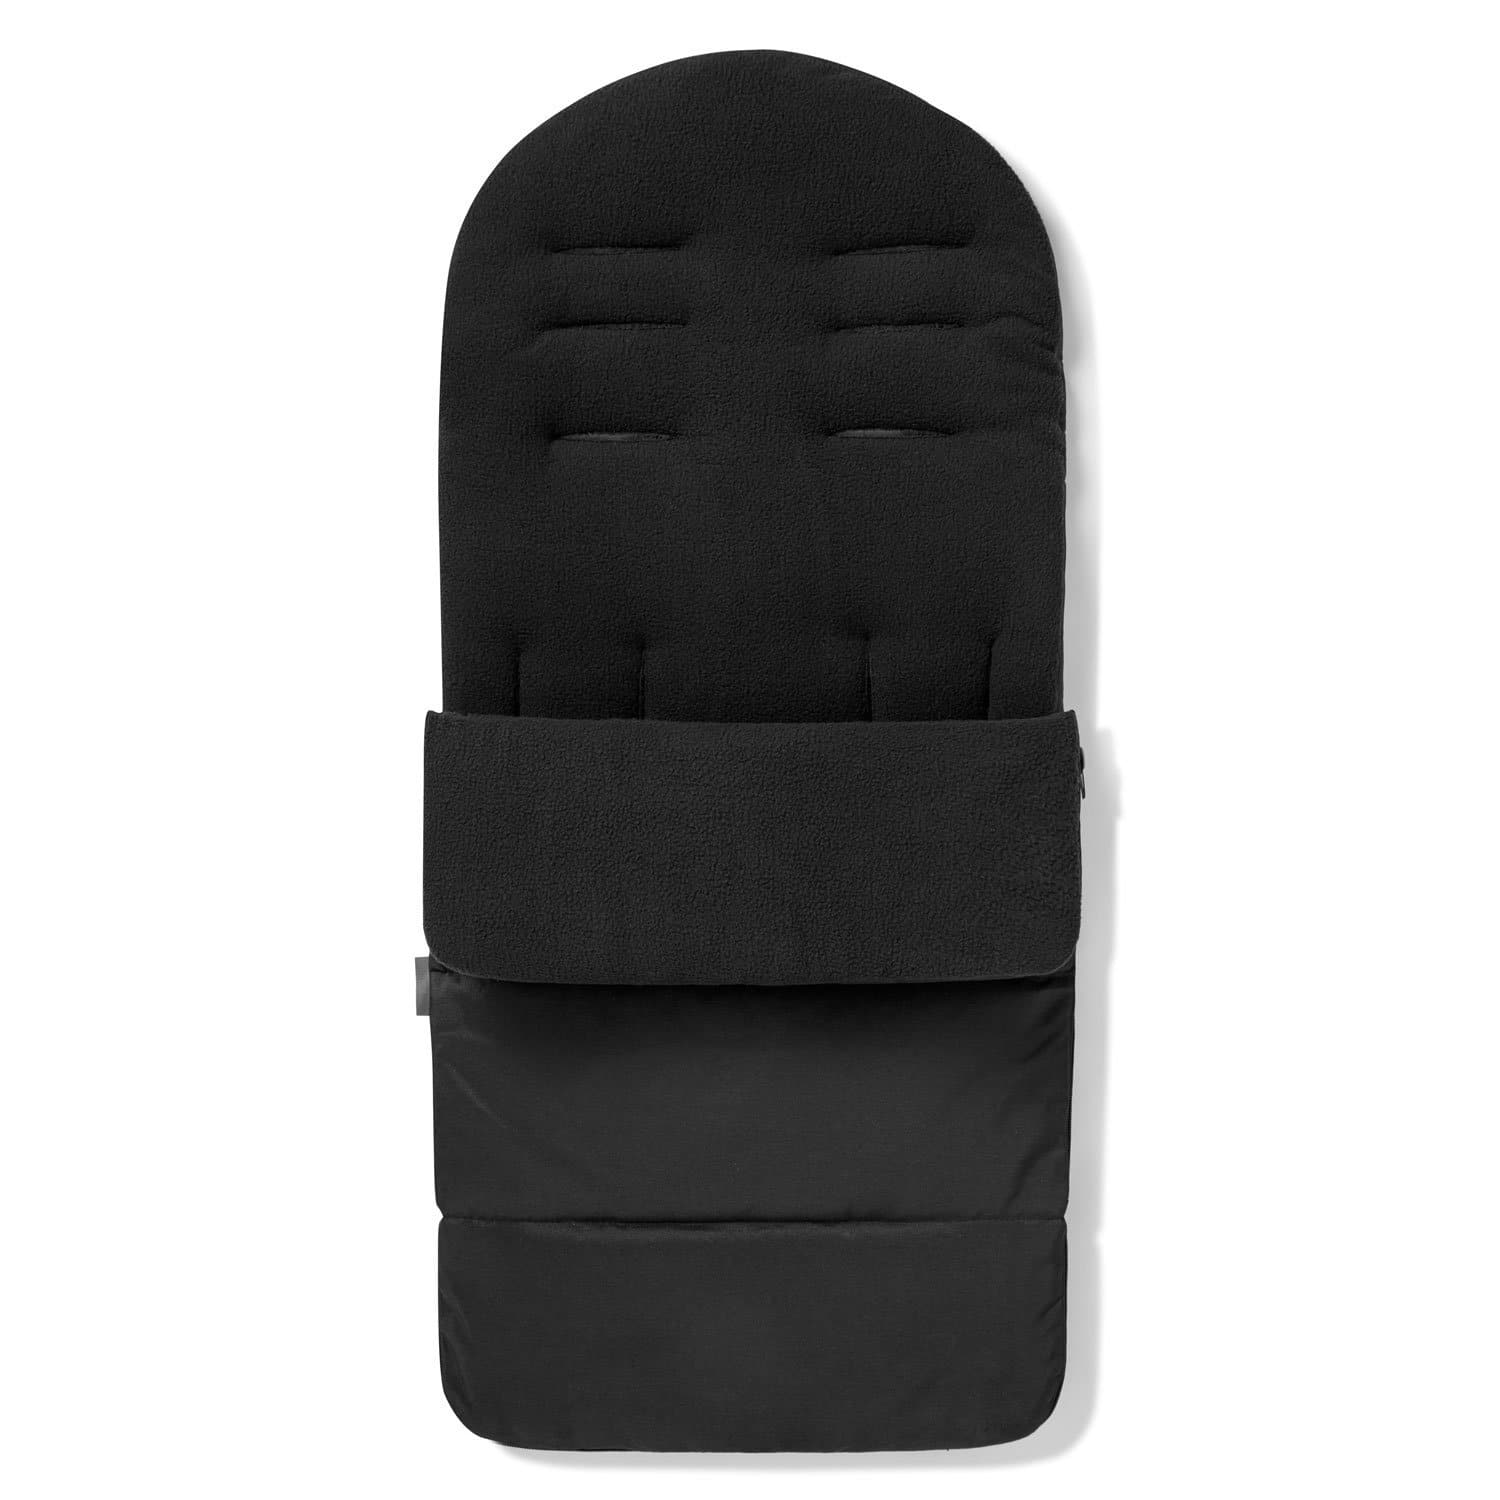 Premium Footmuff / Cosy Toes Compatible with Kinderkraft - Black Jack / Fits All Models | For Your Little One